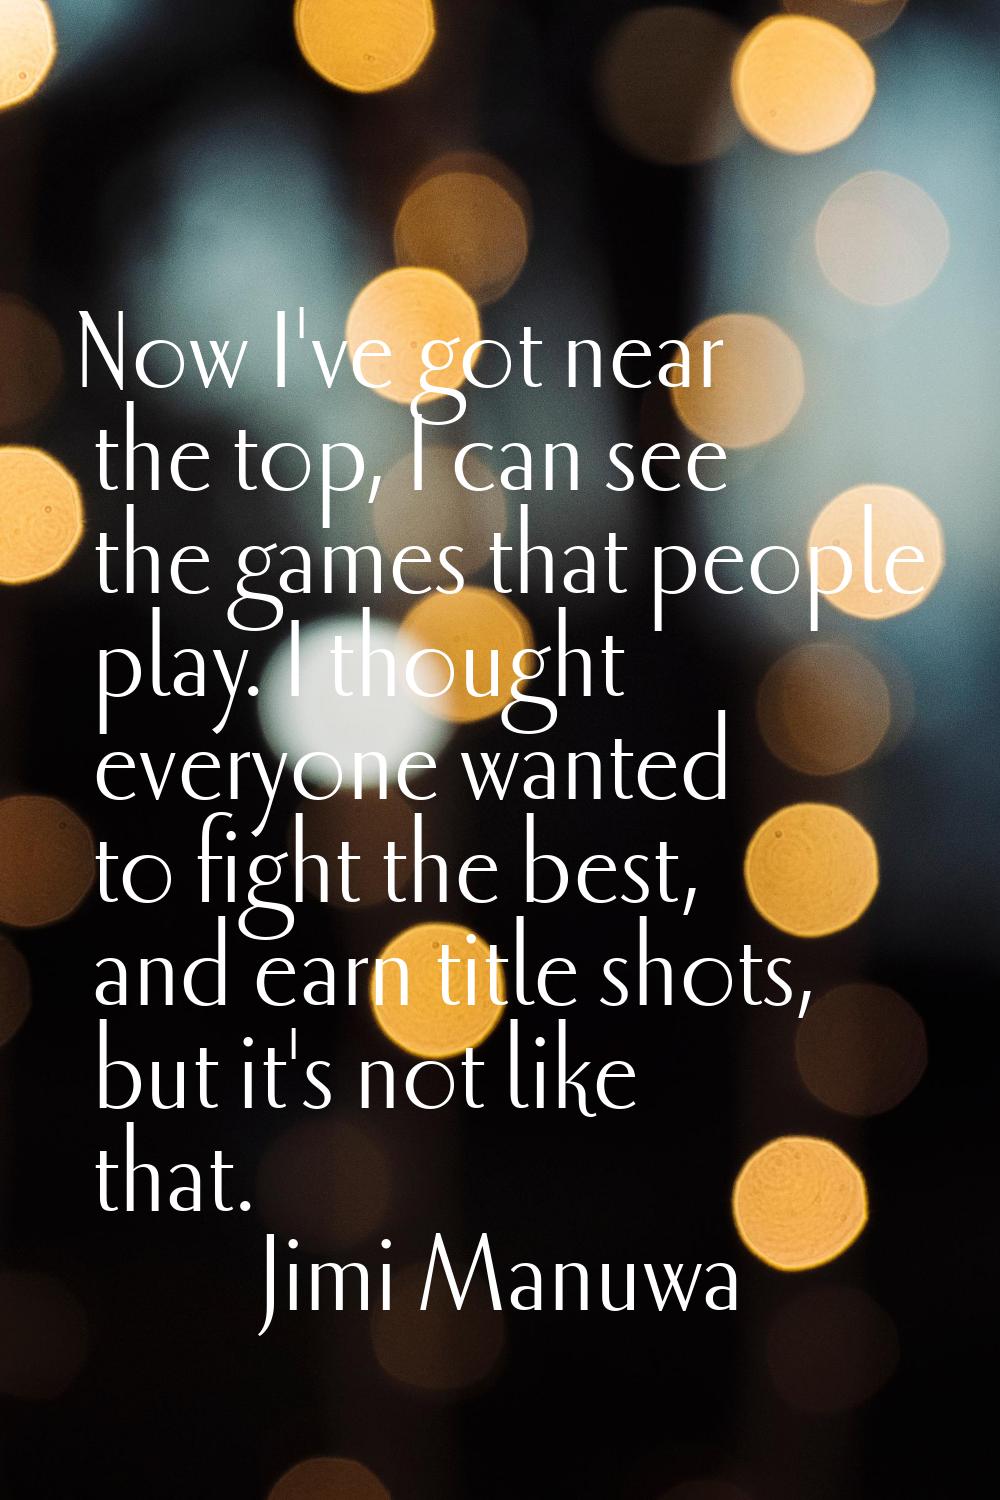 Now I've got near the top, I can see the games that people play. I thought everyone wanted to fight